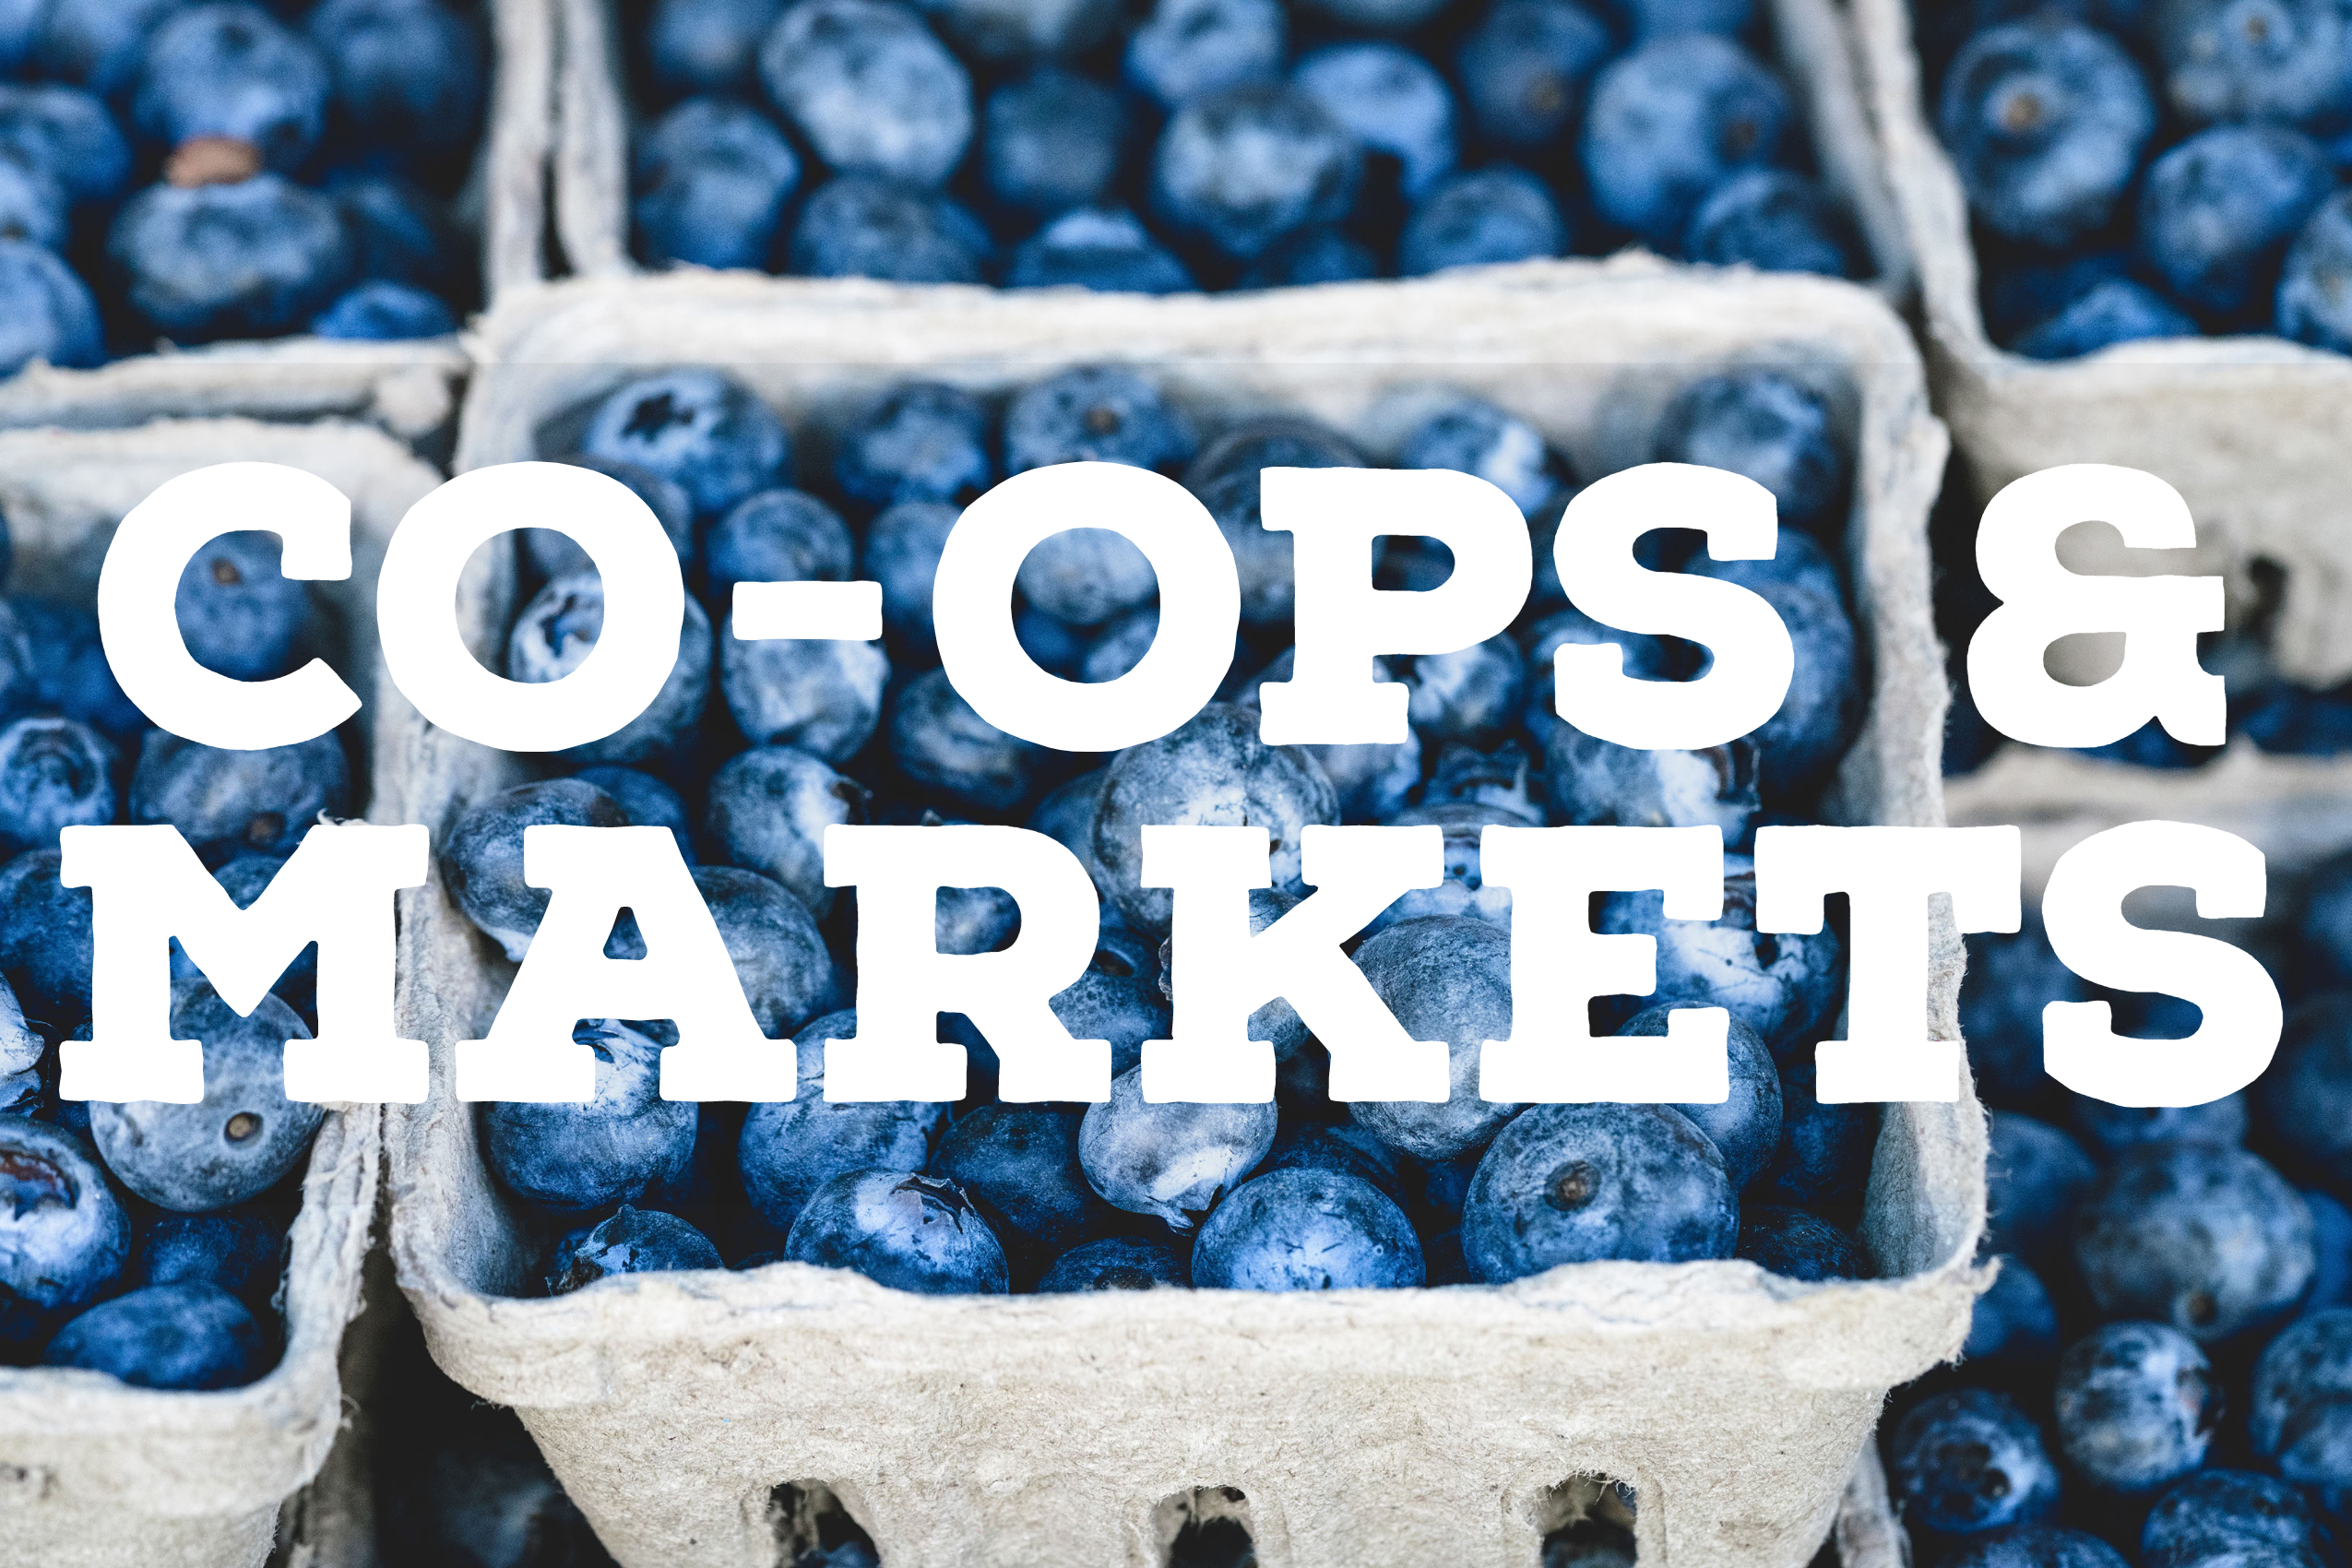 Co-ops, Markets, and Farmers Markets That Build Local Food Systems